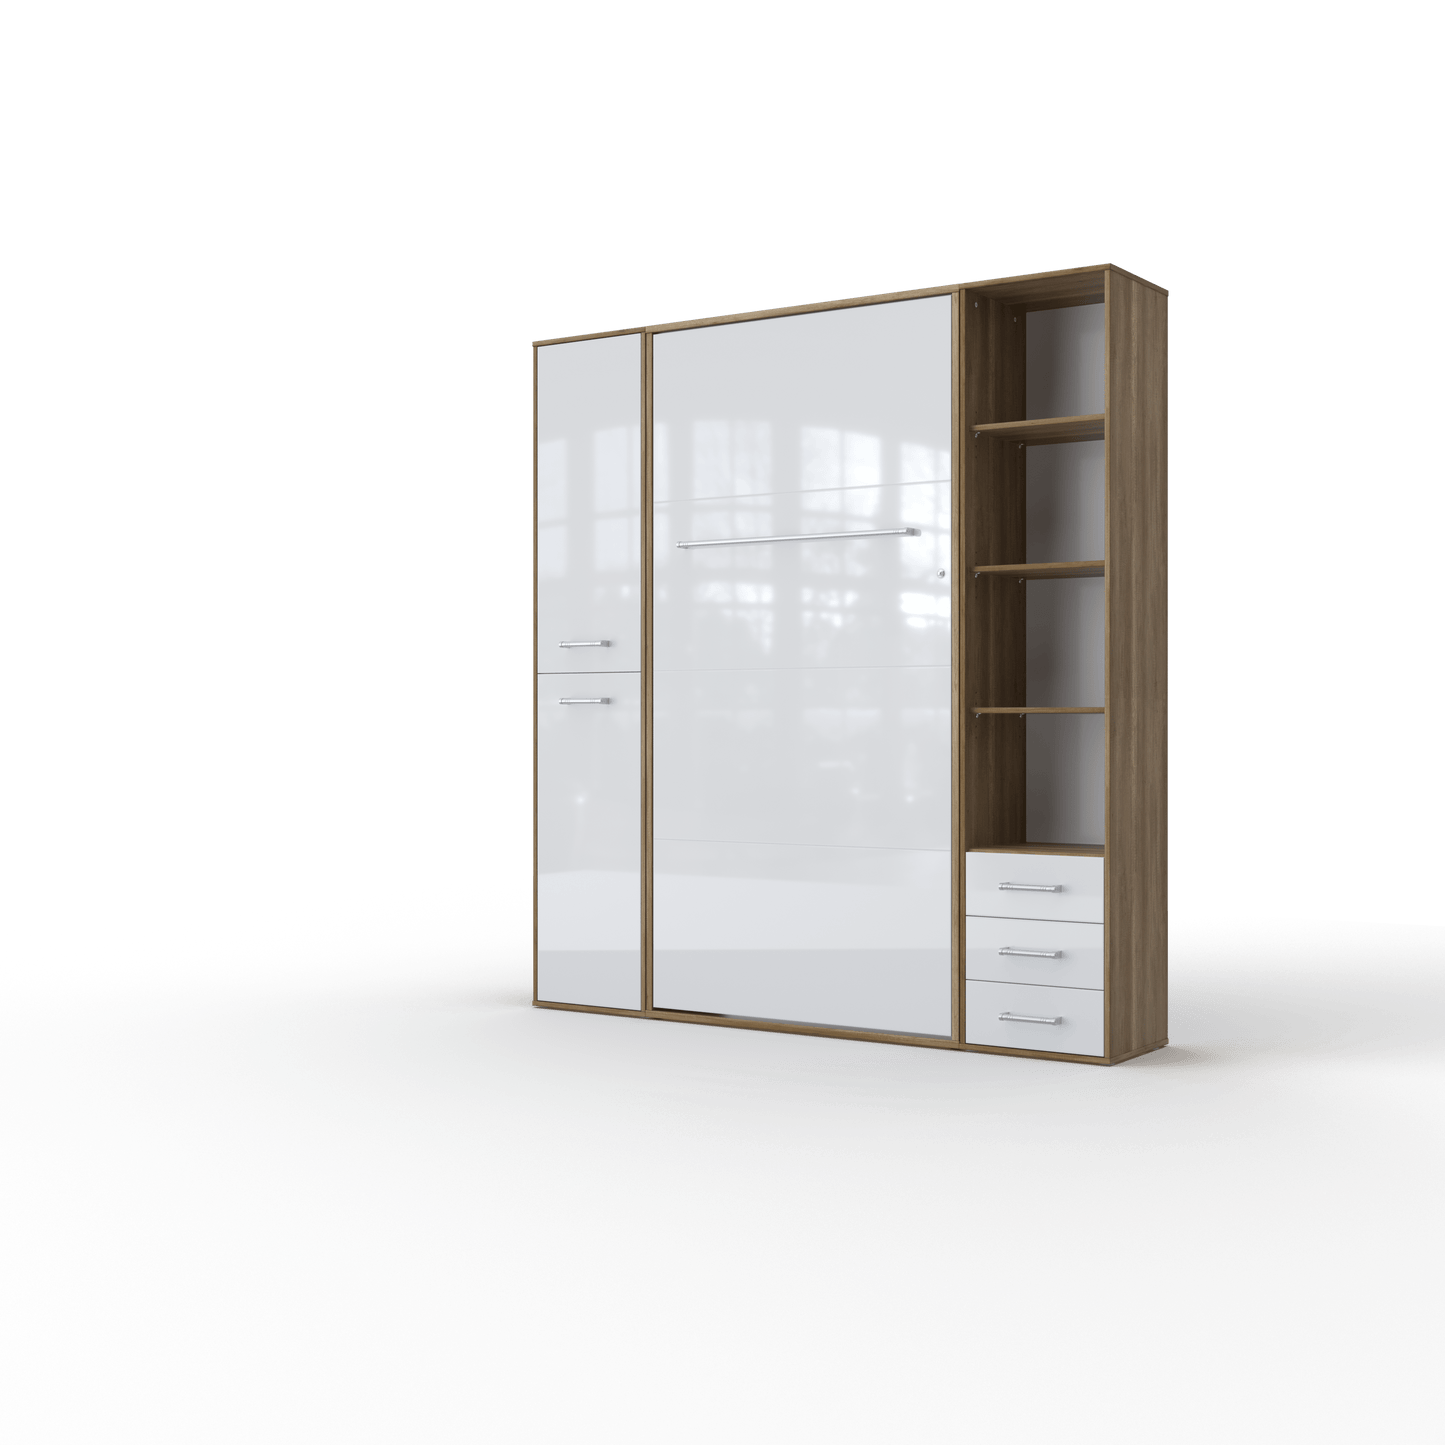 Maxima House Vertical Murphy Bed Invento, European Queen Size with mattress and 2 storage cabinets Oak Country/White IN160V-08/09OW